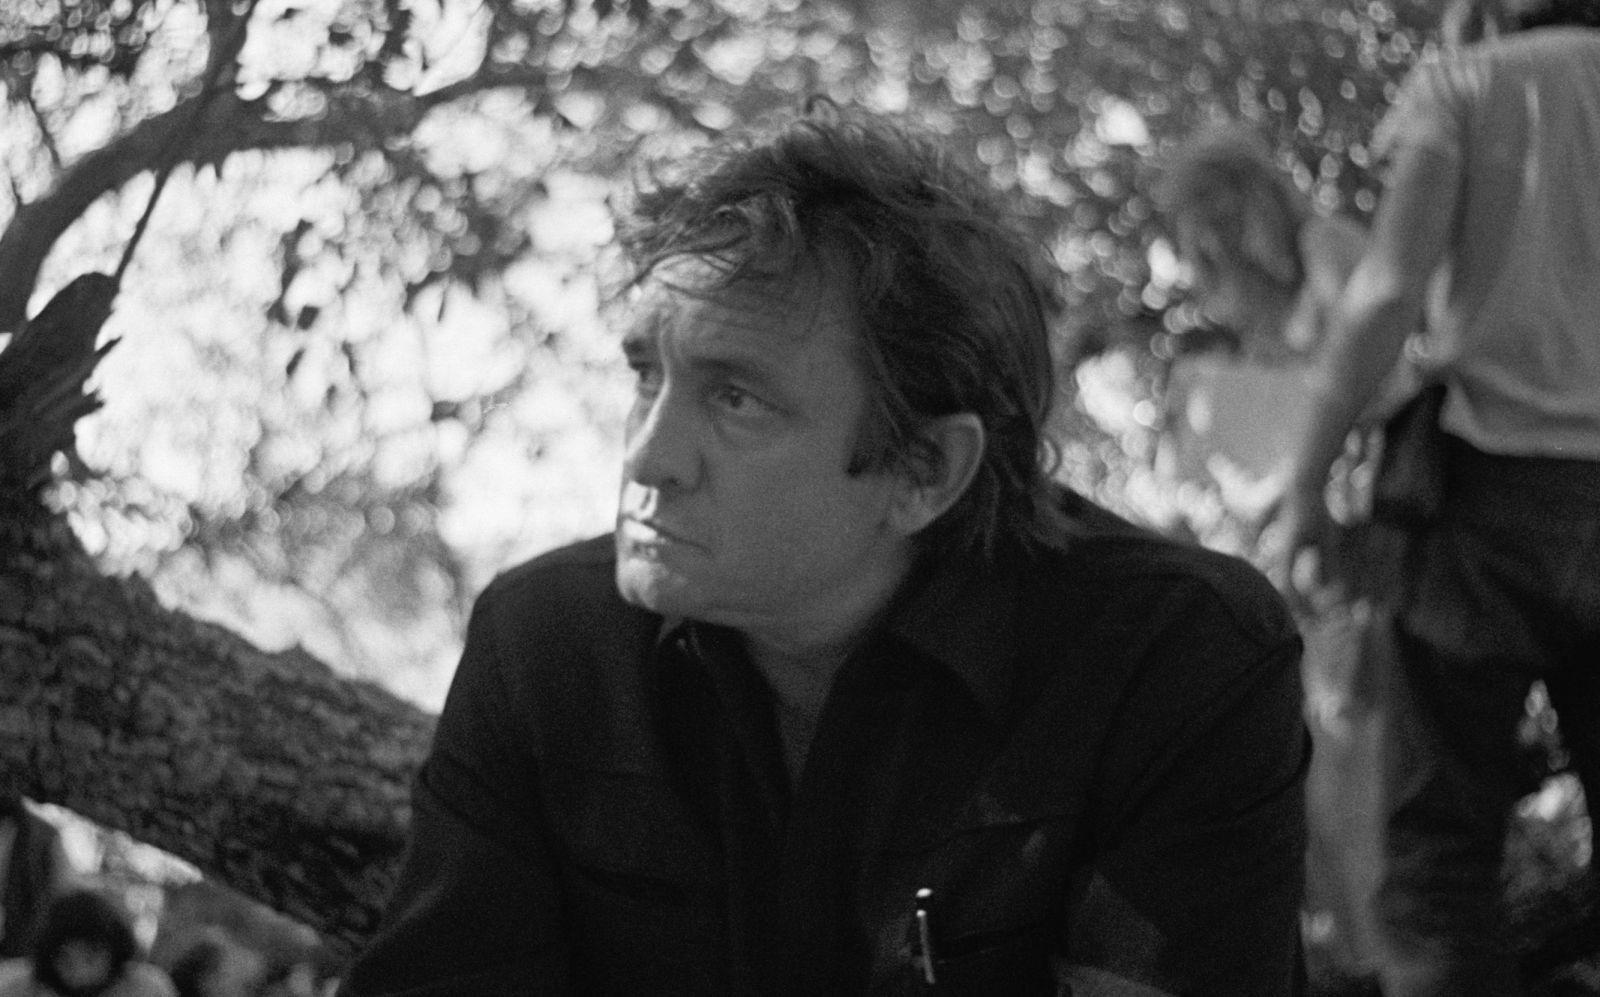 American country singer Johnny Cash shown on location during the filming at the Sea of Galilee, Dec. 12, 1971. He is making a 90 minutes feature film on the life of Jesus Christ, in which Cash invested half a million of his own money. He narrates and sings on the soundtrack but does not appear in the film. (AP Photo)